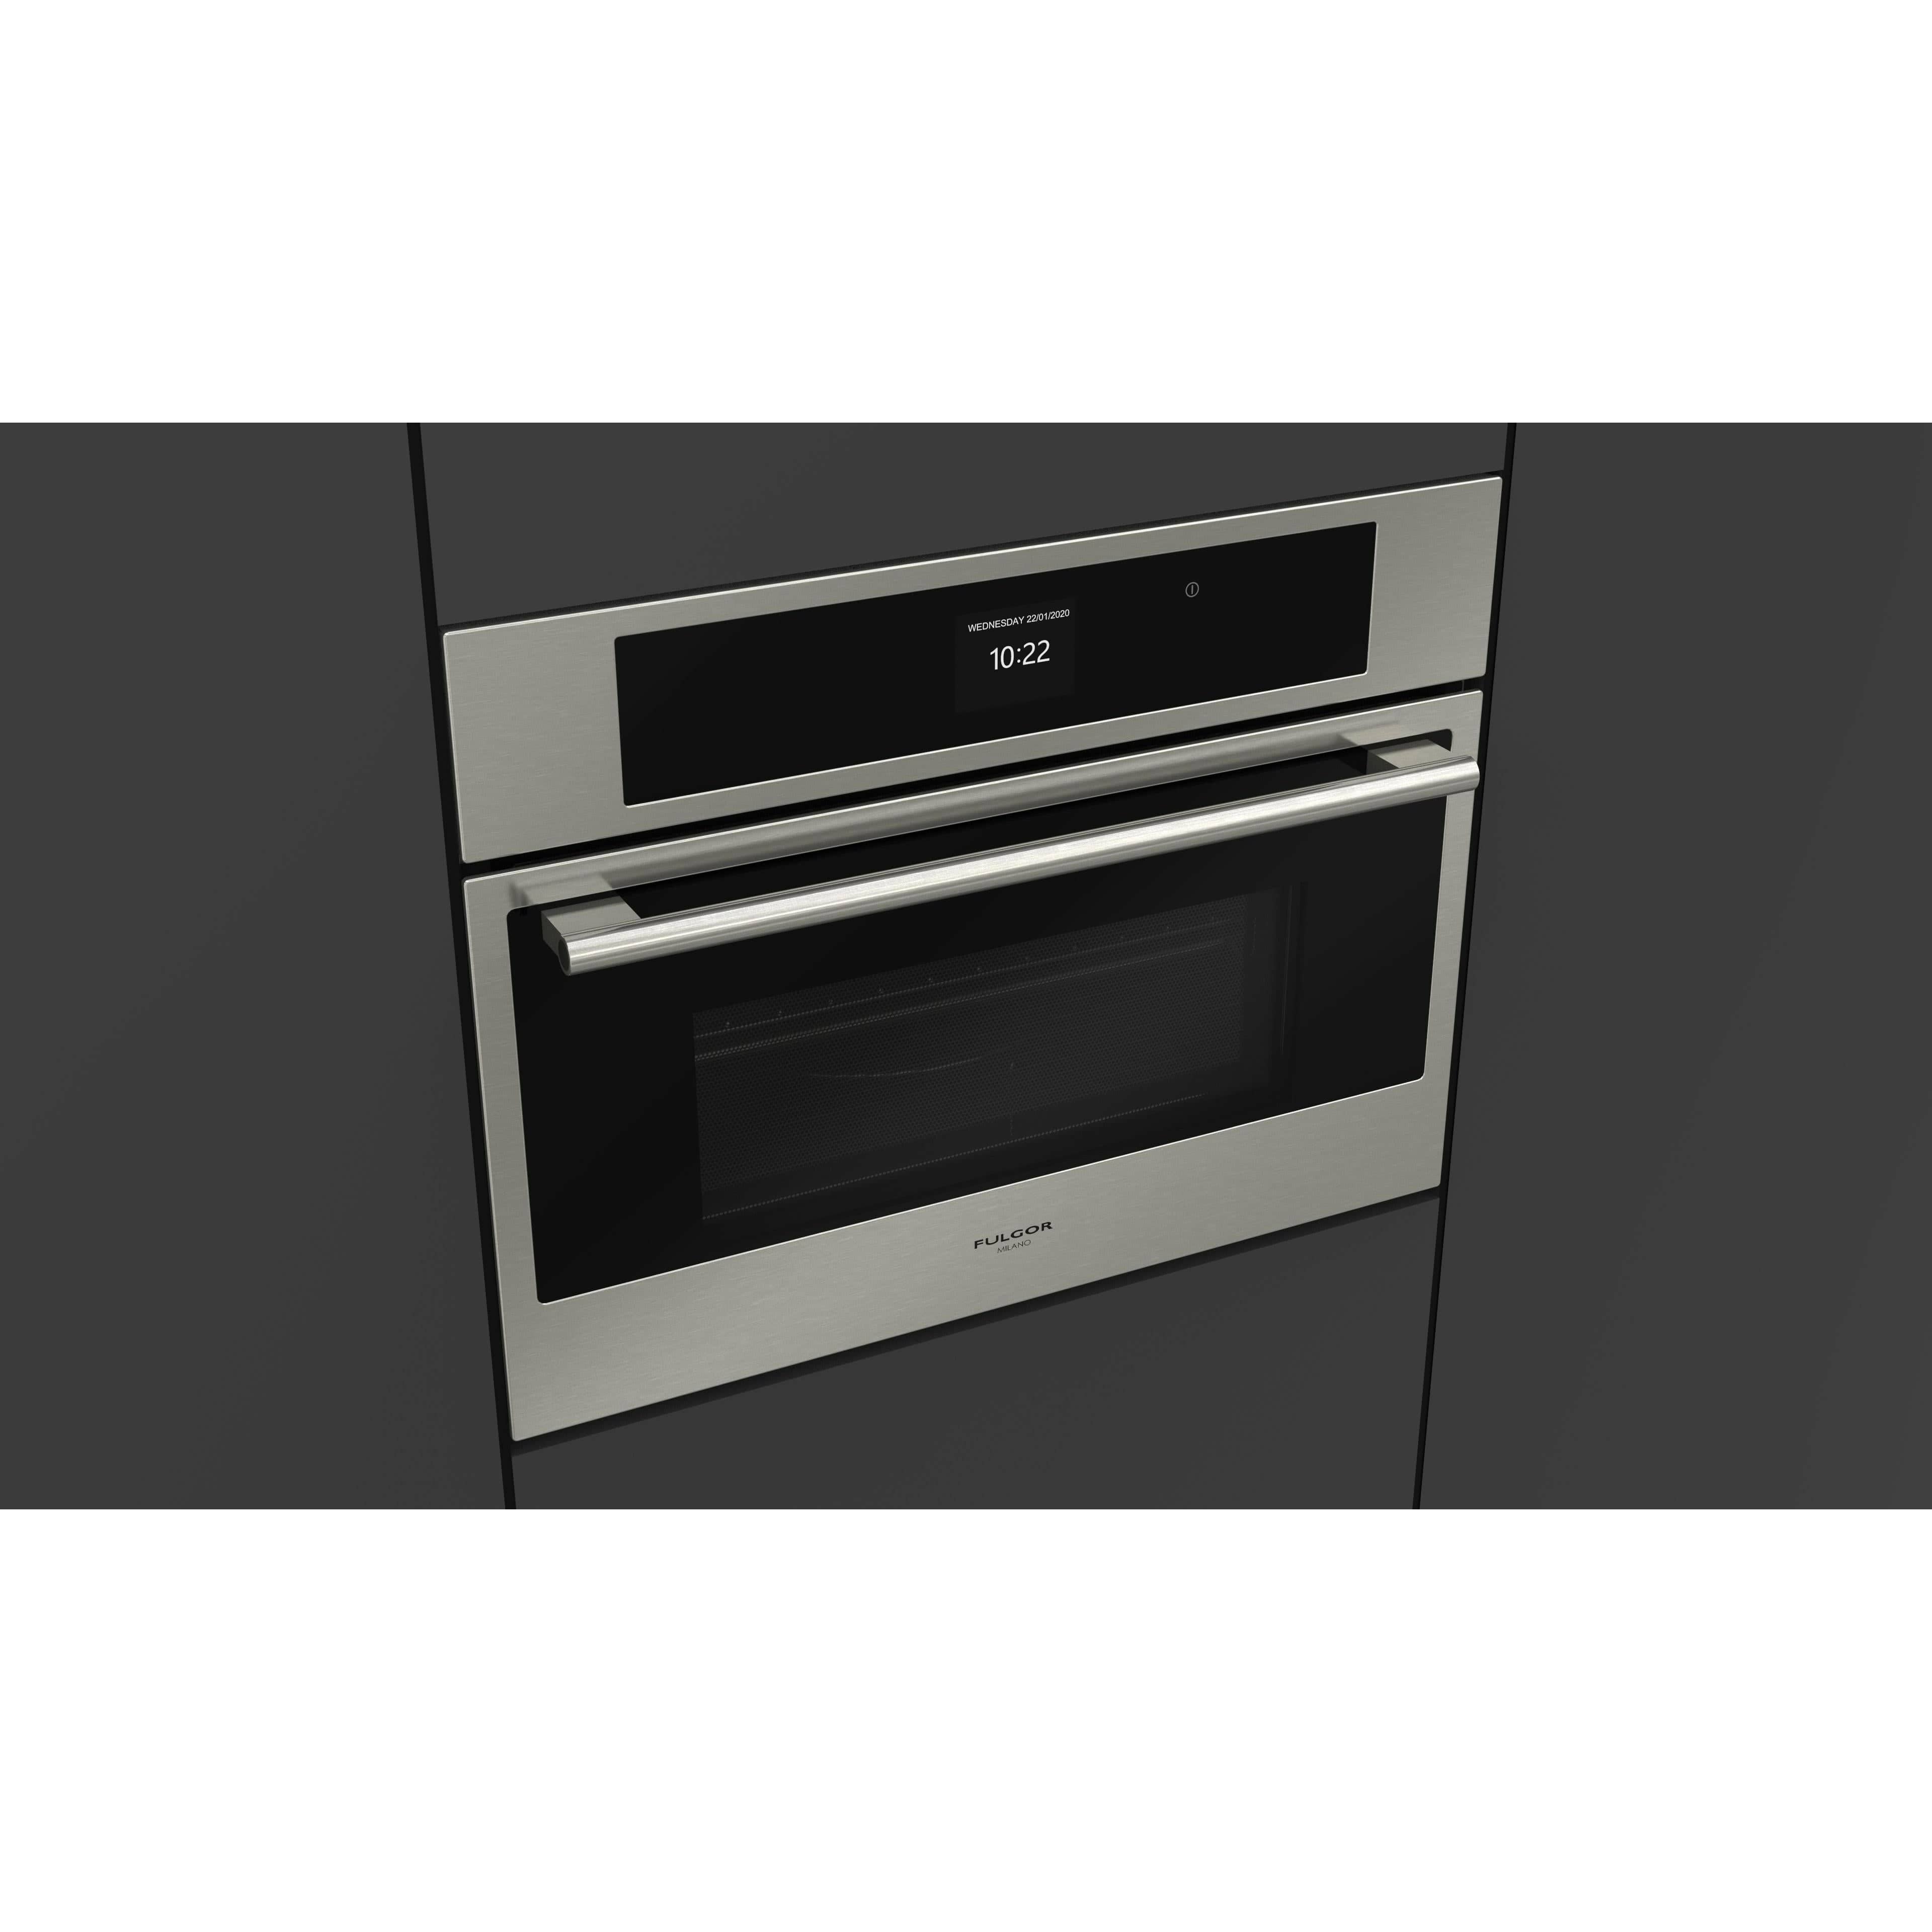 Fulgor Milano 24" 1.2 cu. ft. Total Capacity Electric Combination Single Wall Oven with 1 Oven Rack Convection - F7DSPD24S1 Wall Oven F7DSPD24S1 Luxury Appliances Direct